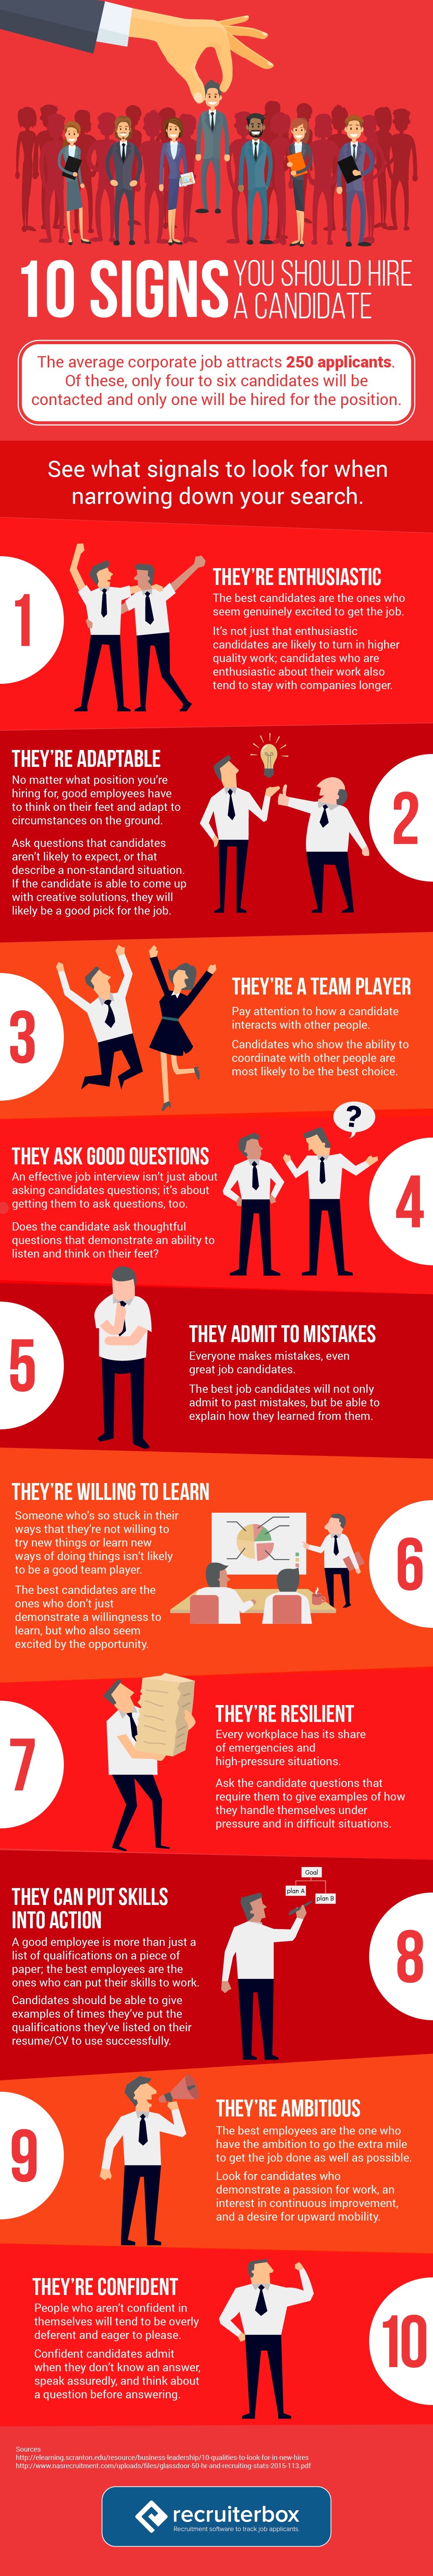 signs you should hire a candidate infographic